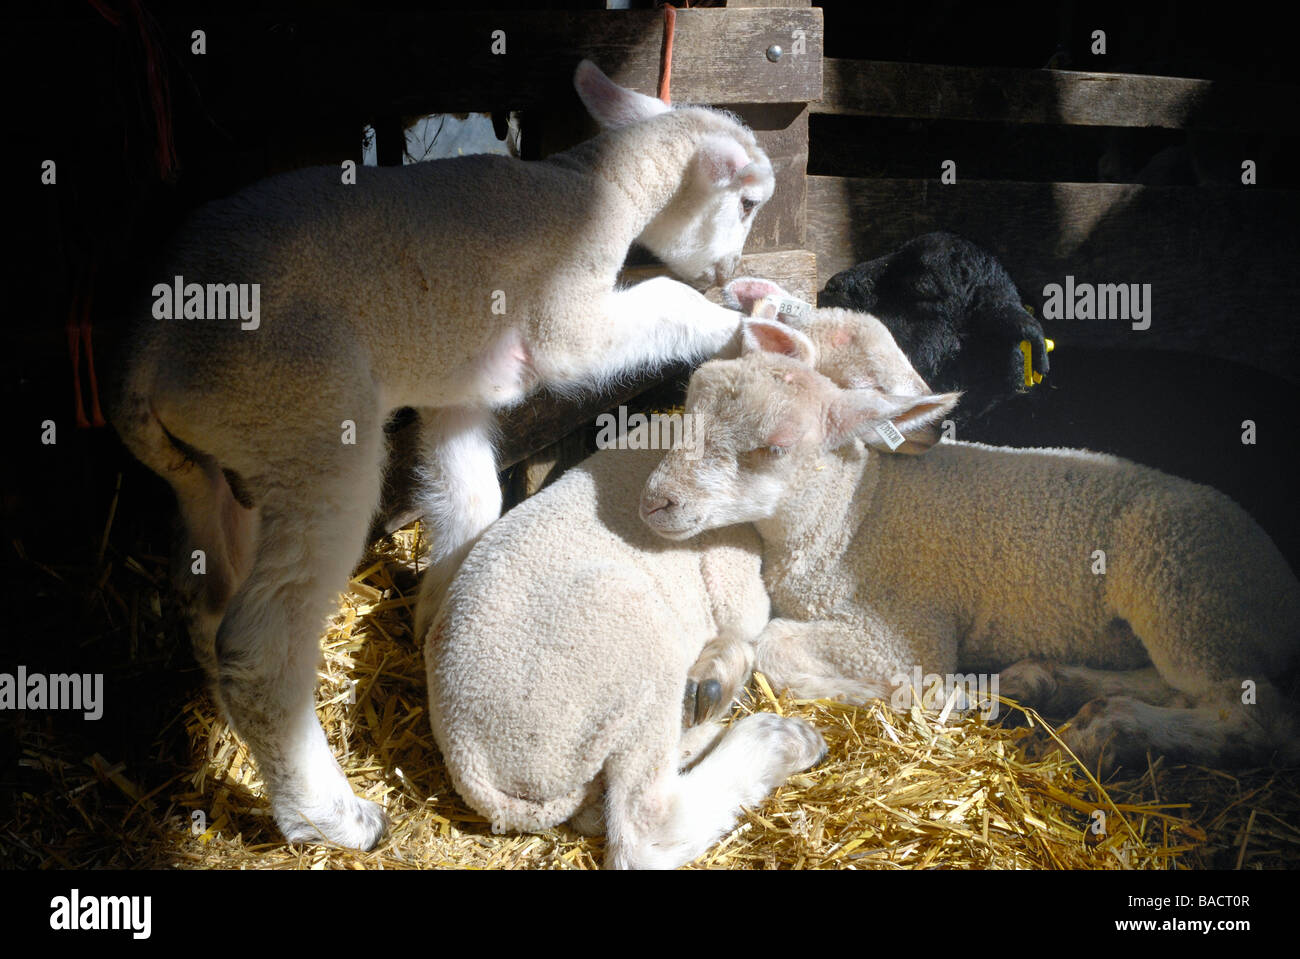 Four newborn lambs cuddled together in a pen Stock Photo